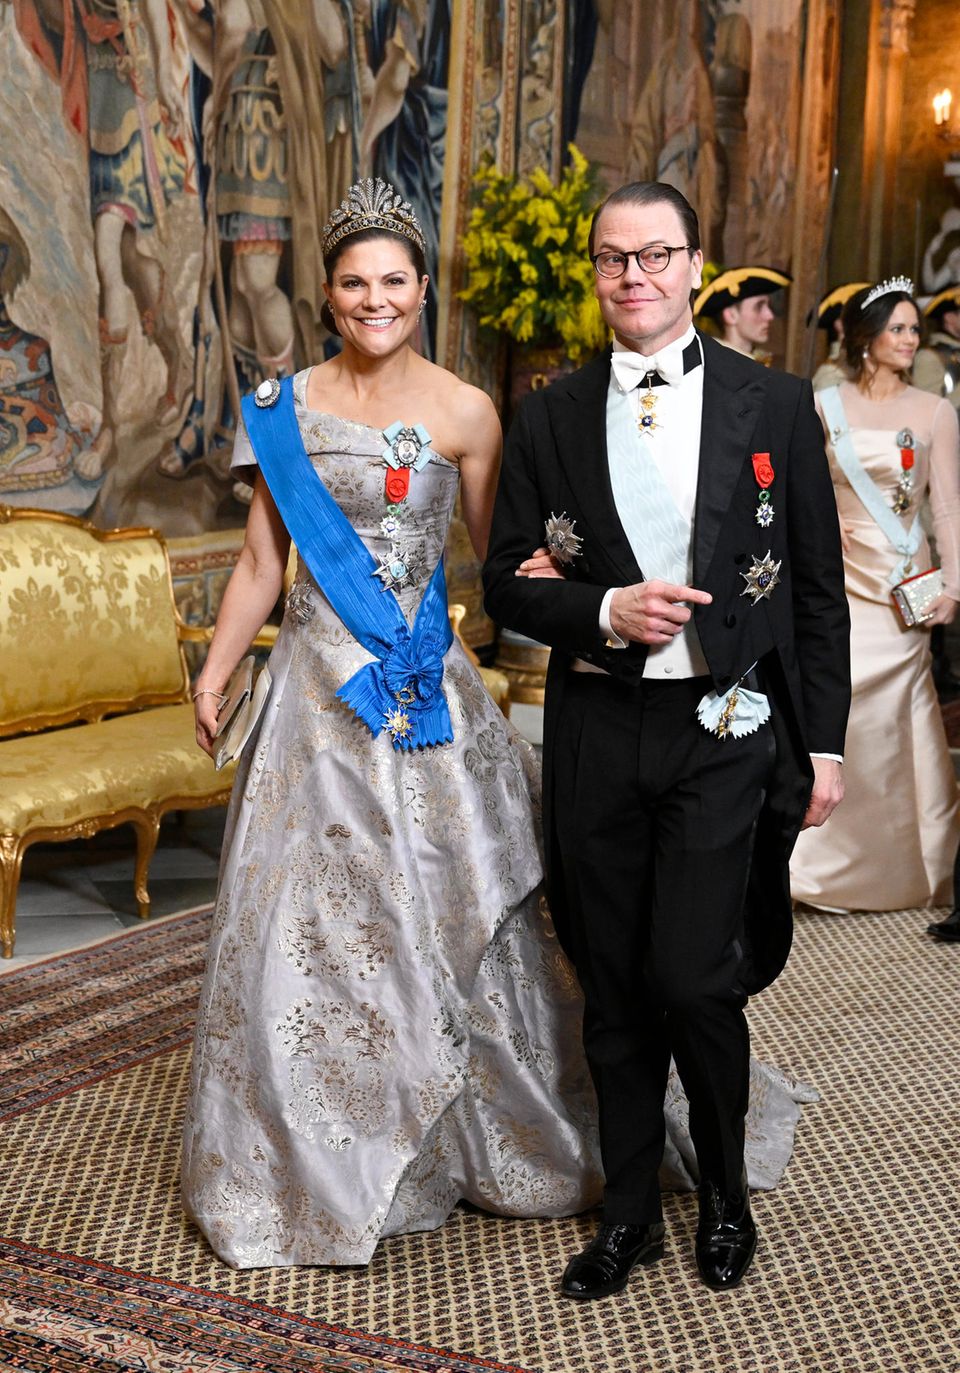 Crown Princess Victoria and Prince Daniel at the state banquet in the Royal Palace.